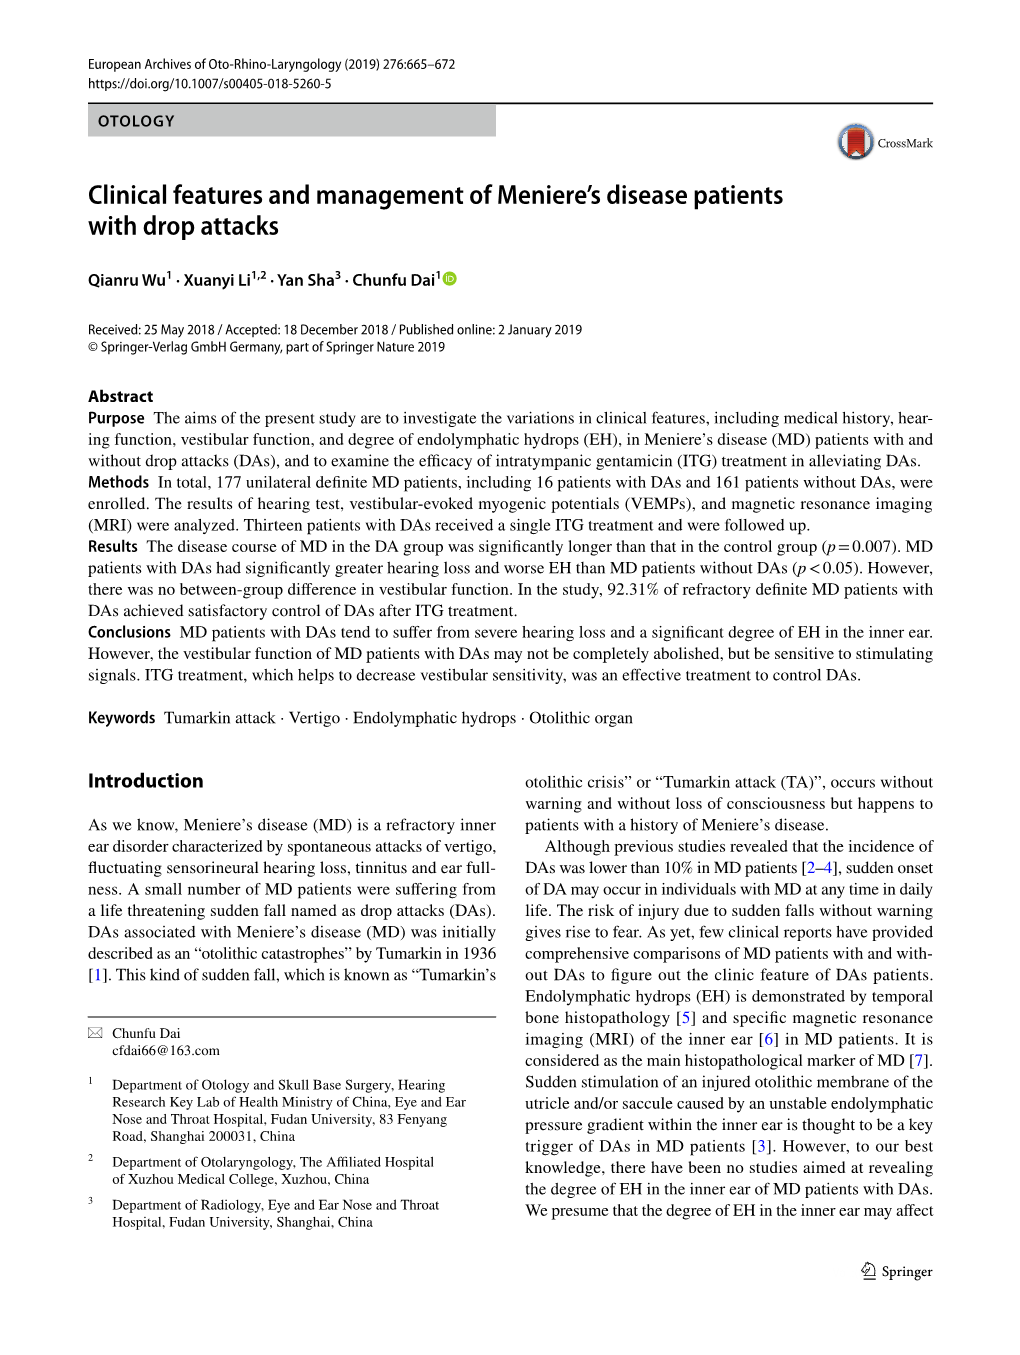 Clinical Features and Management of Meniere's Disease Patients with Drop Attacks